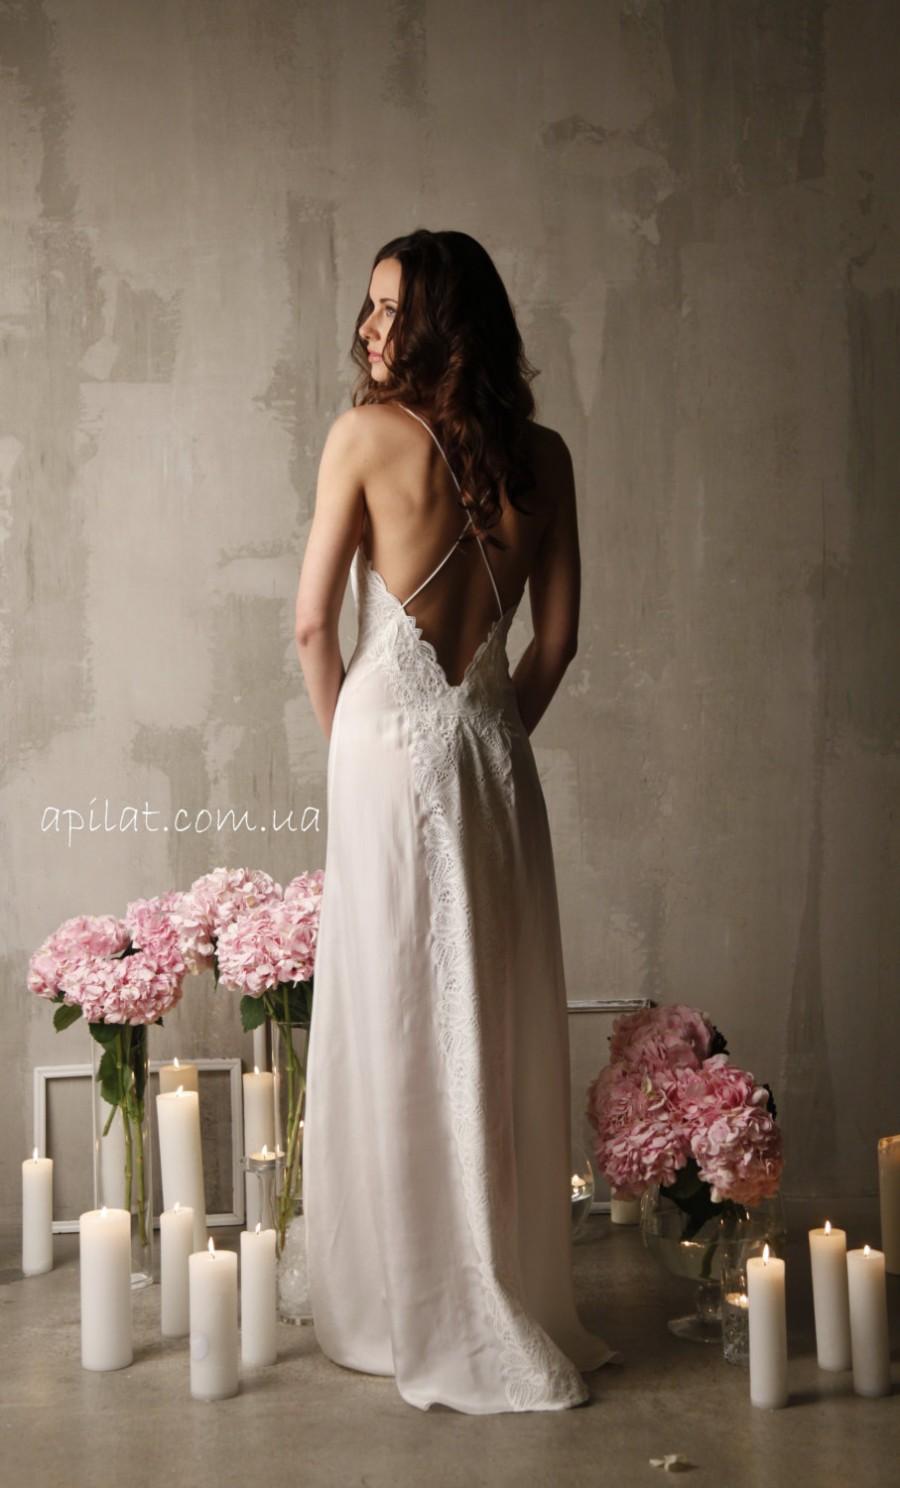 Hochzeit - Long Silk Bridal Nightgown With Open Back and Lace F12(Lingerie, Nightdress), Bridal Lingerie, Wedding Lingerie, Honeymoon, Christmas Gifts